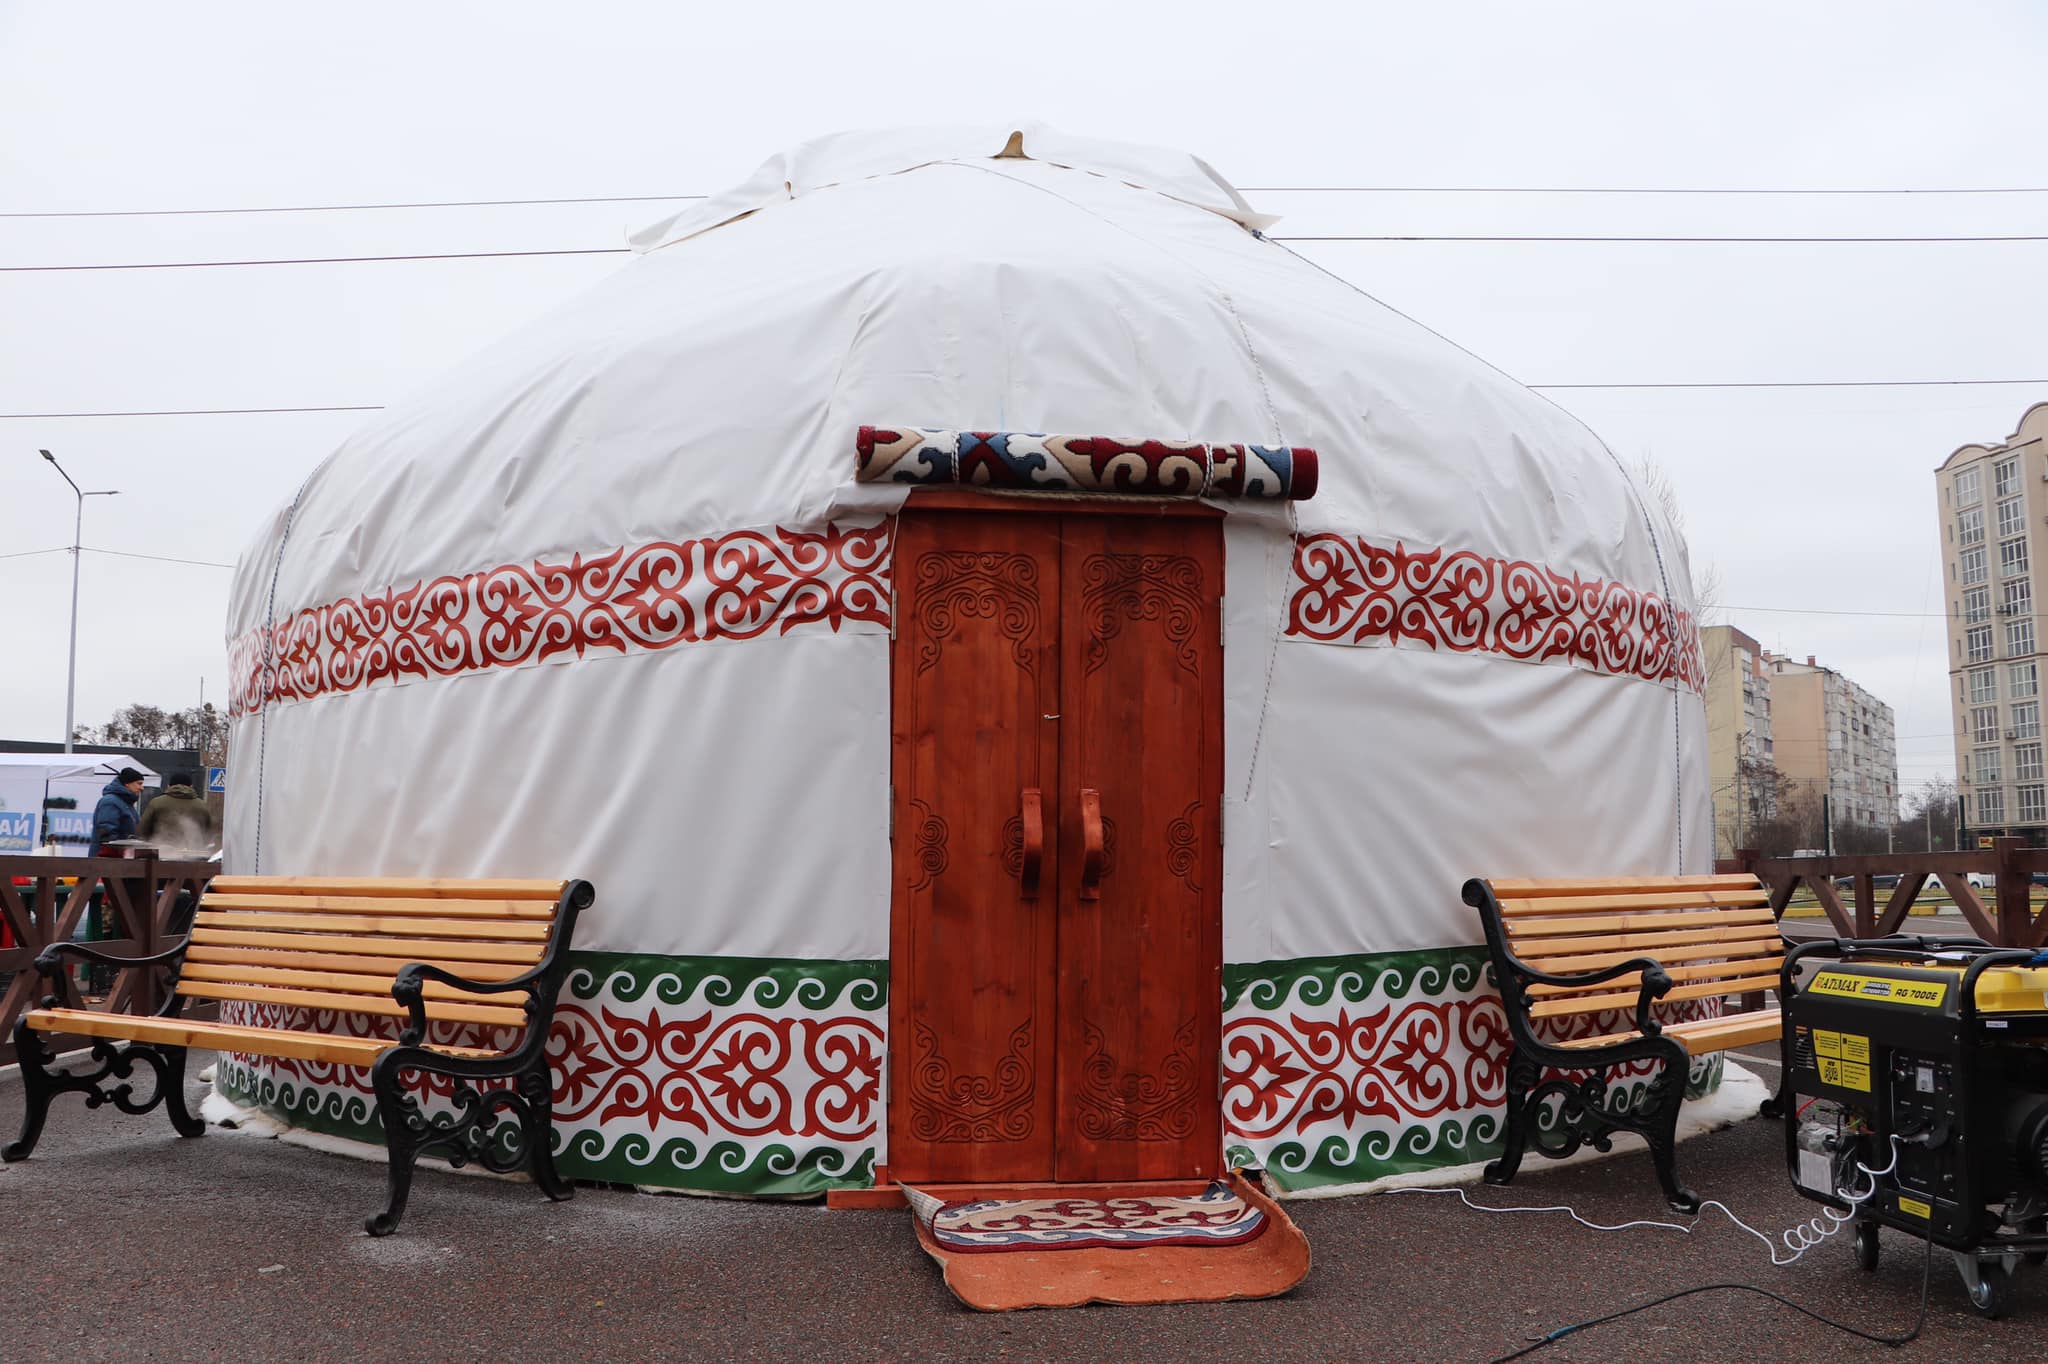 "Yurt of invincibility" was opened in Bucha with the support of Kazakhstan